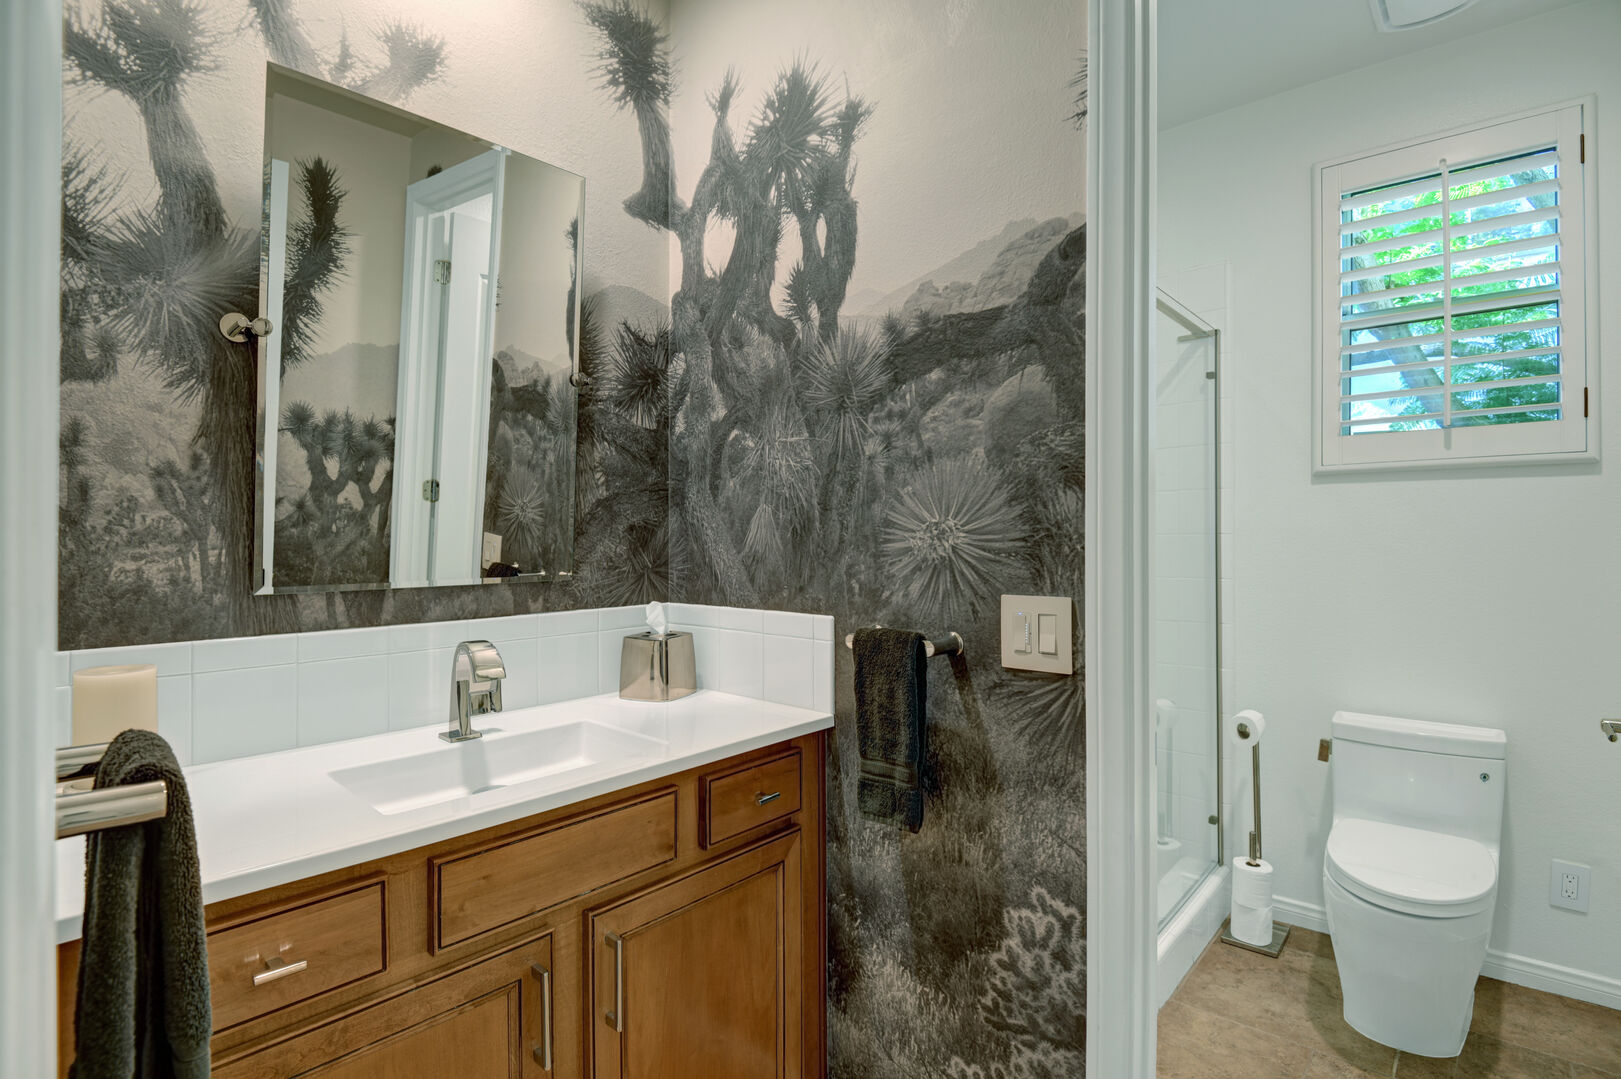 Hallway Bathroom 3 has a breathtaking Joshua Tree wallpaper, which beautifully showcases the iconic trees of one of our most beloved national parks.